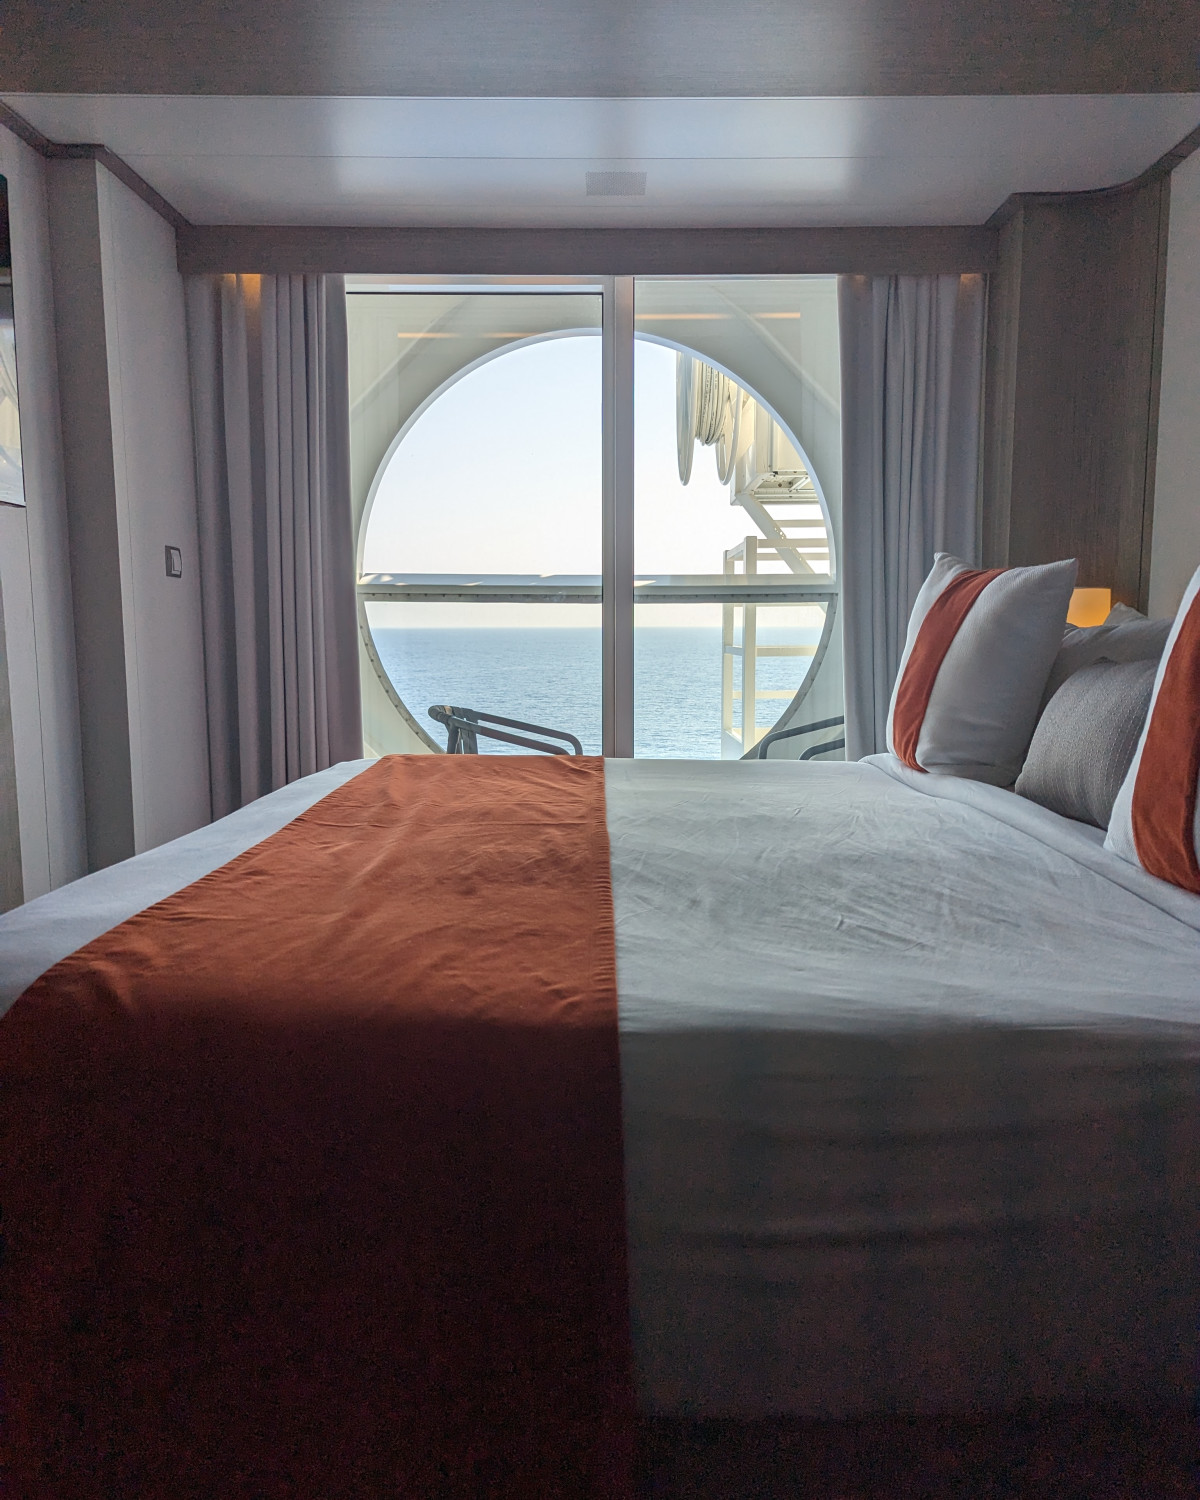 Hotel room and glass window with sea view